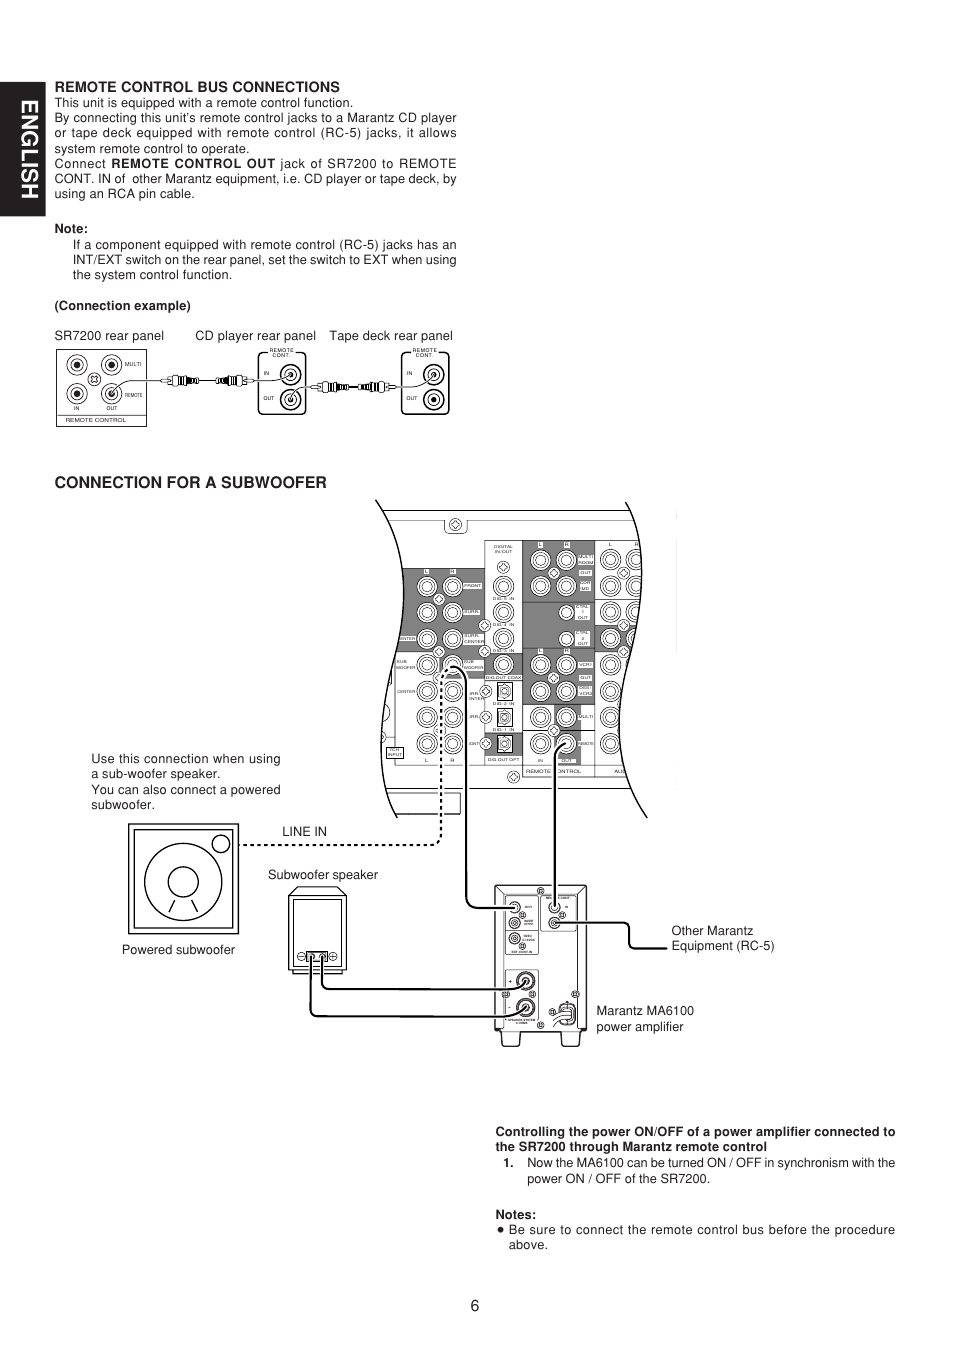 English, Connection for a subwoofer, Remote control bus connections | Marantz  SR7200 User Manual | Page 13 / 39 | Original mode